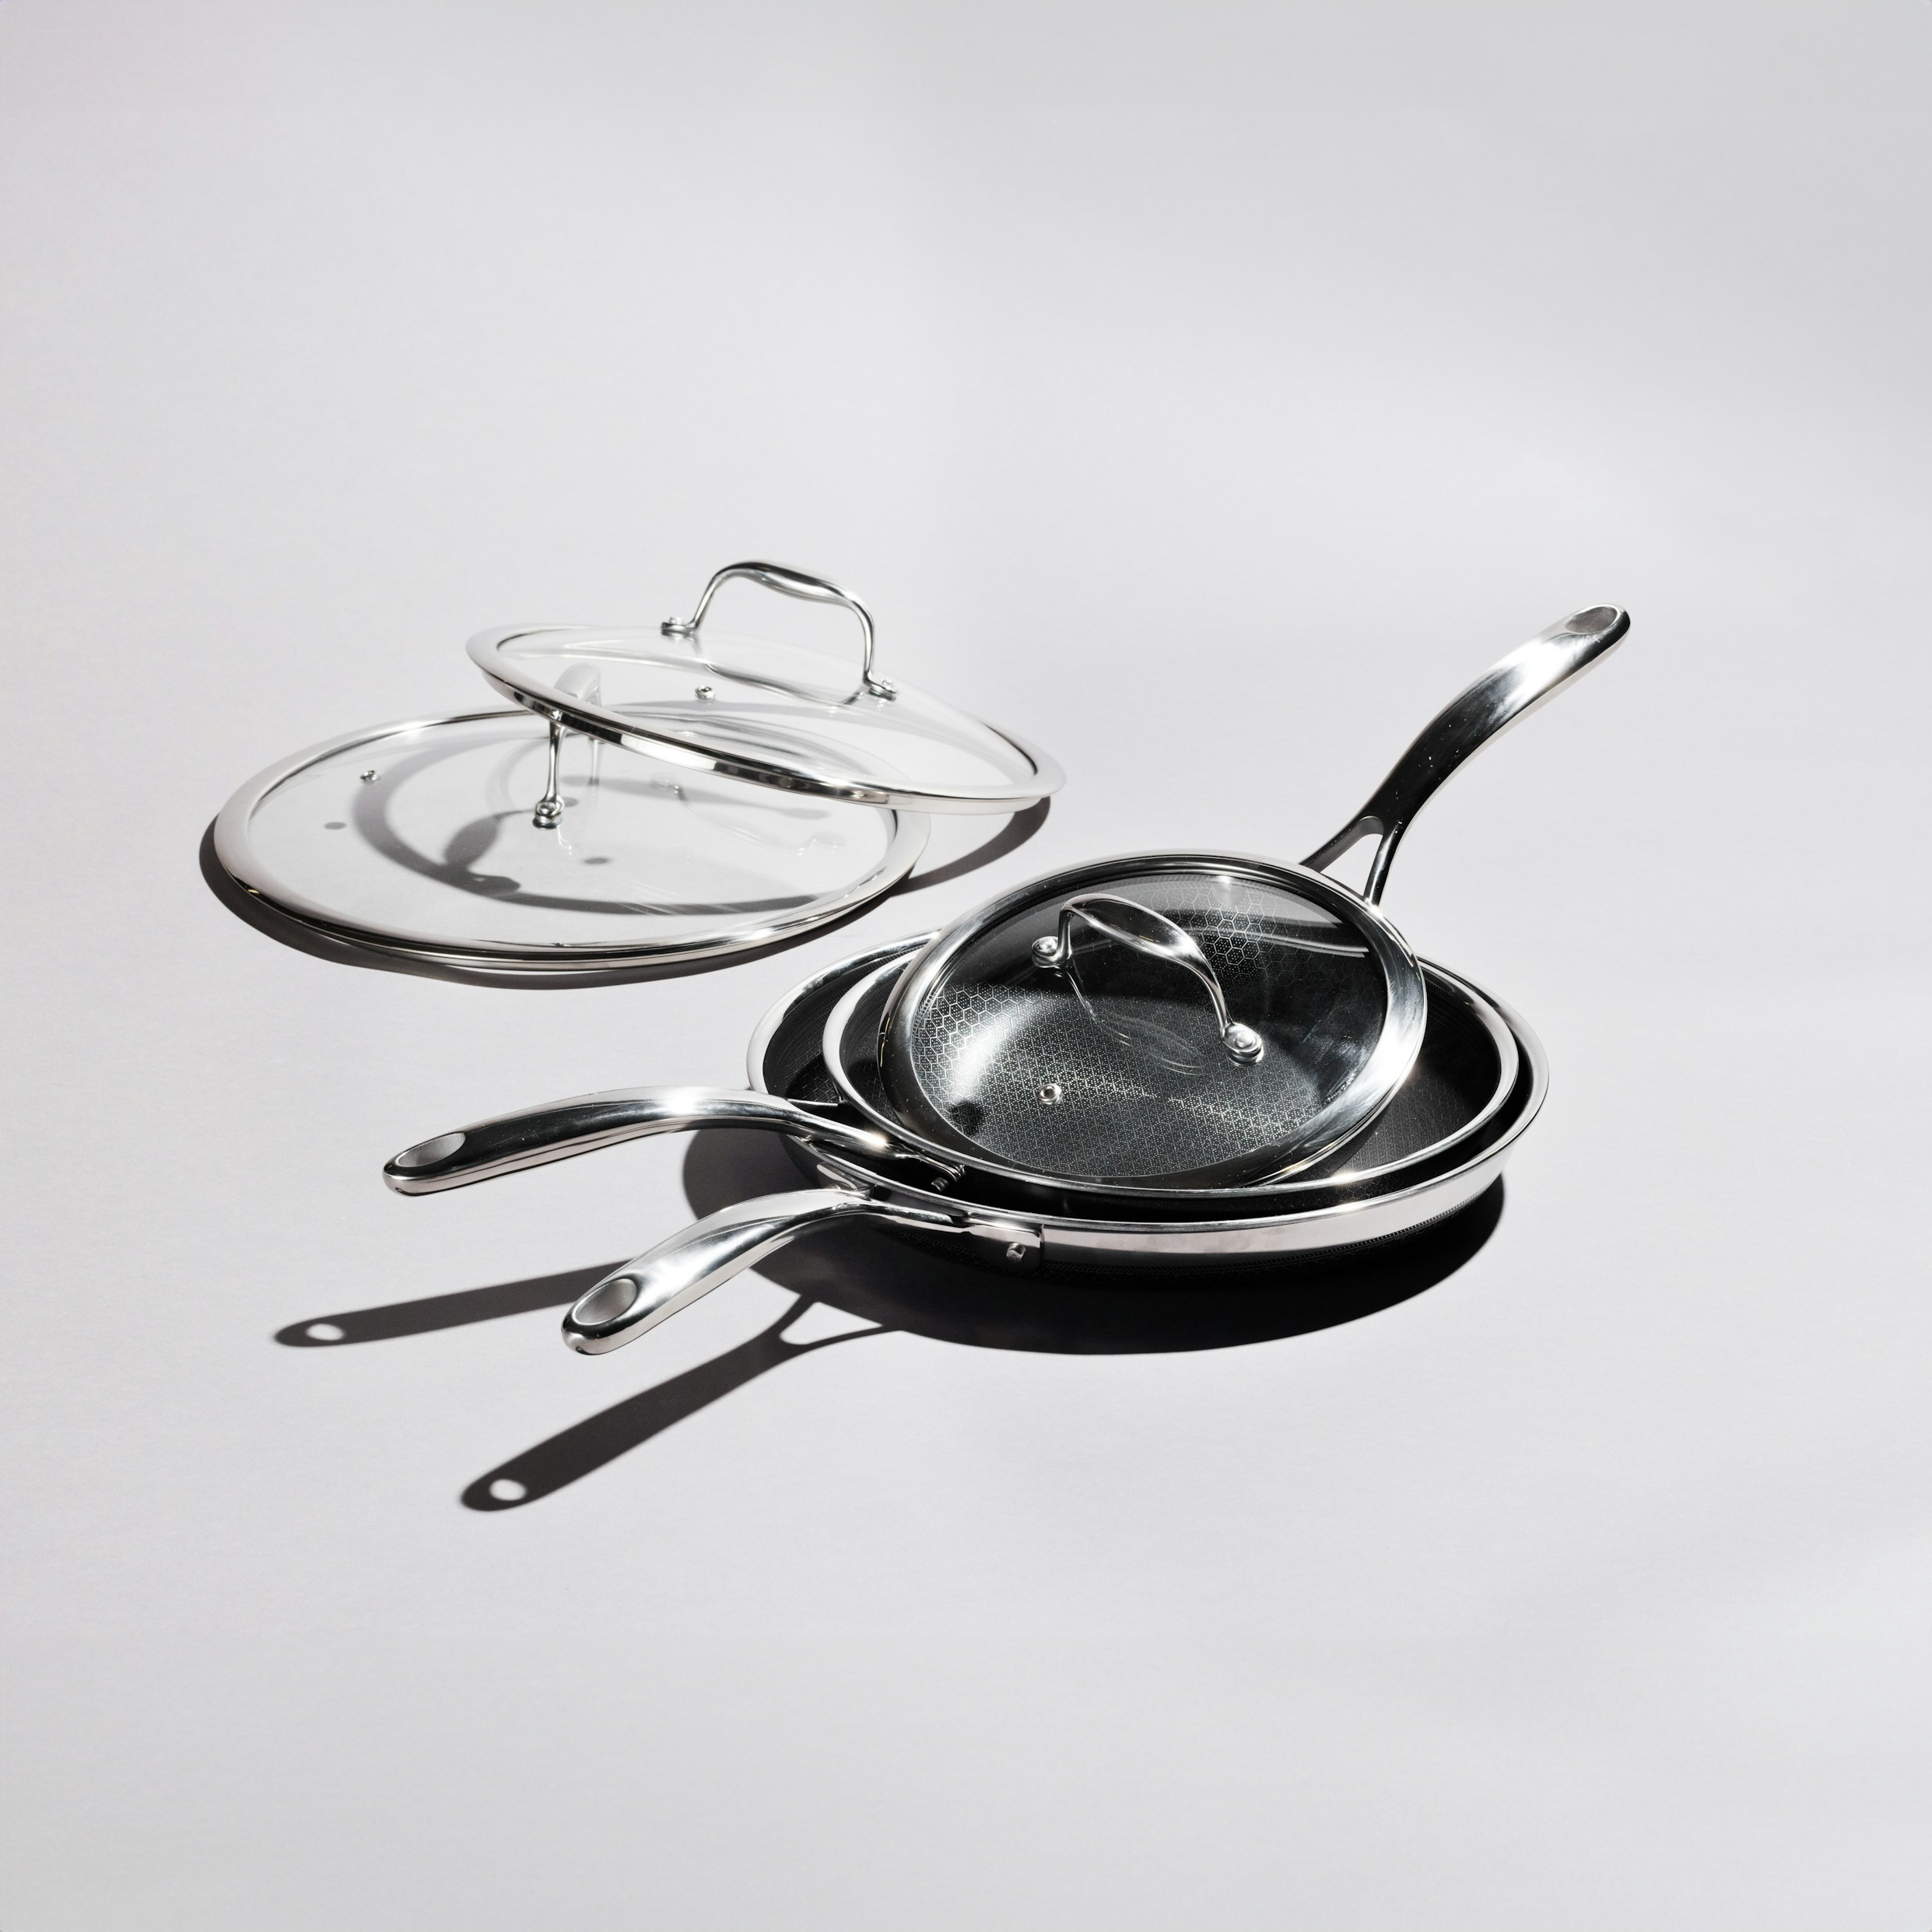 HexClad hybrid cookware featuring a stainless steel pan with a transparent glass lid. The pan's unique design ensures even heating and non-stick cooking for chef-quality results at home.